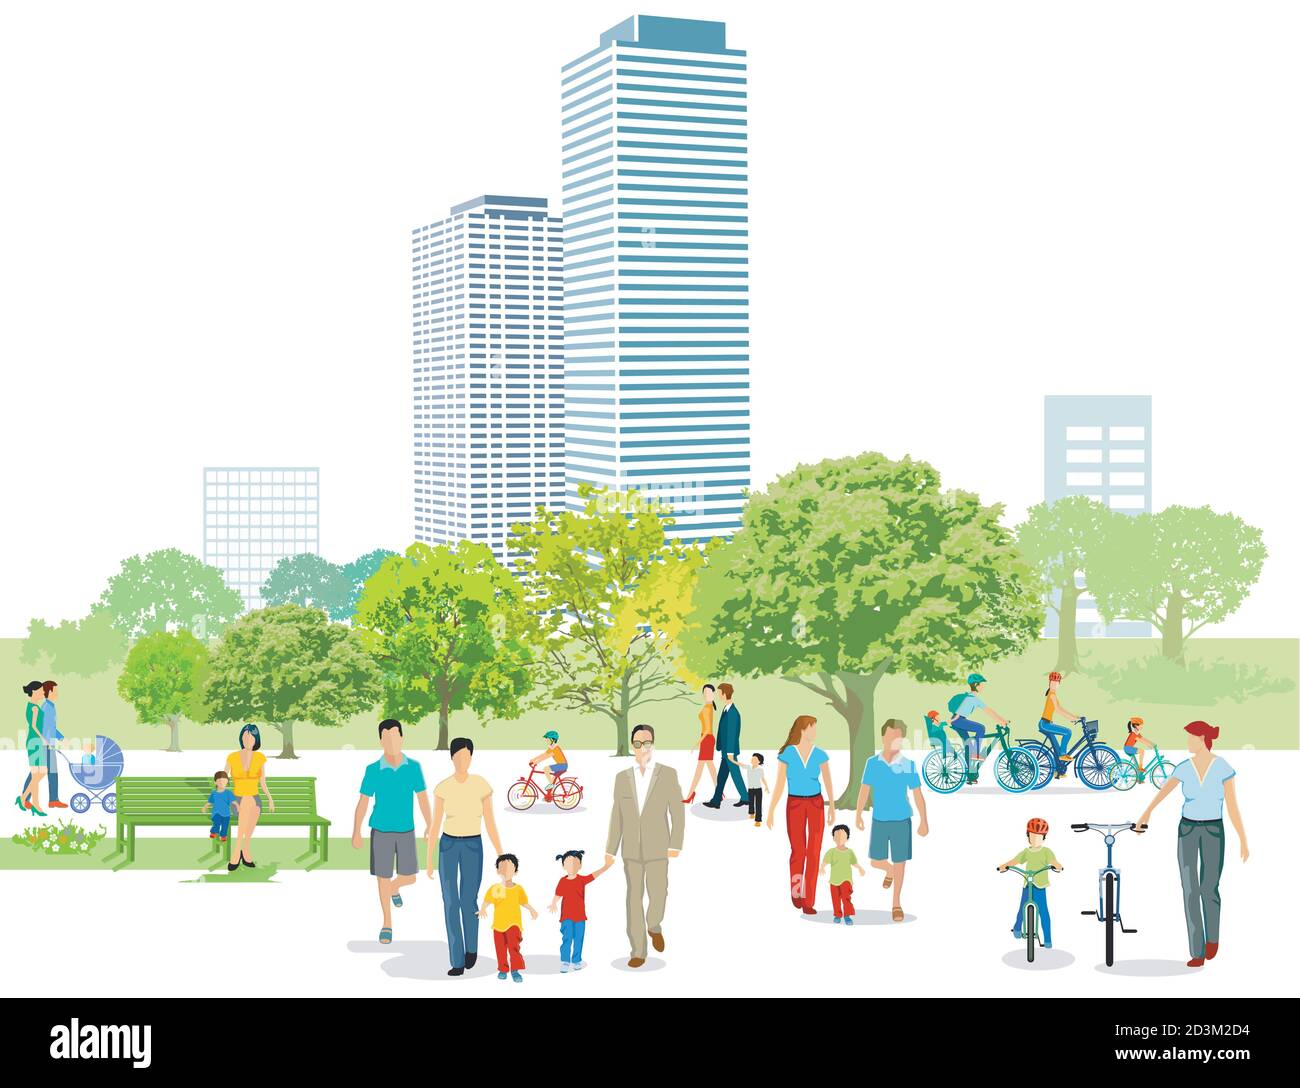 Families and pedestrians in the park, illustration Stock Vector